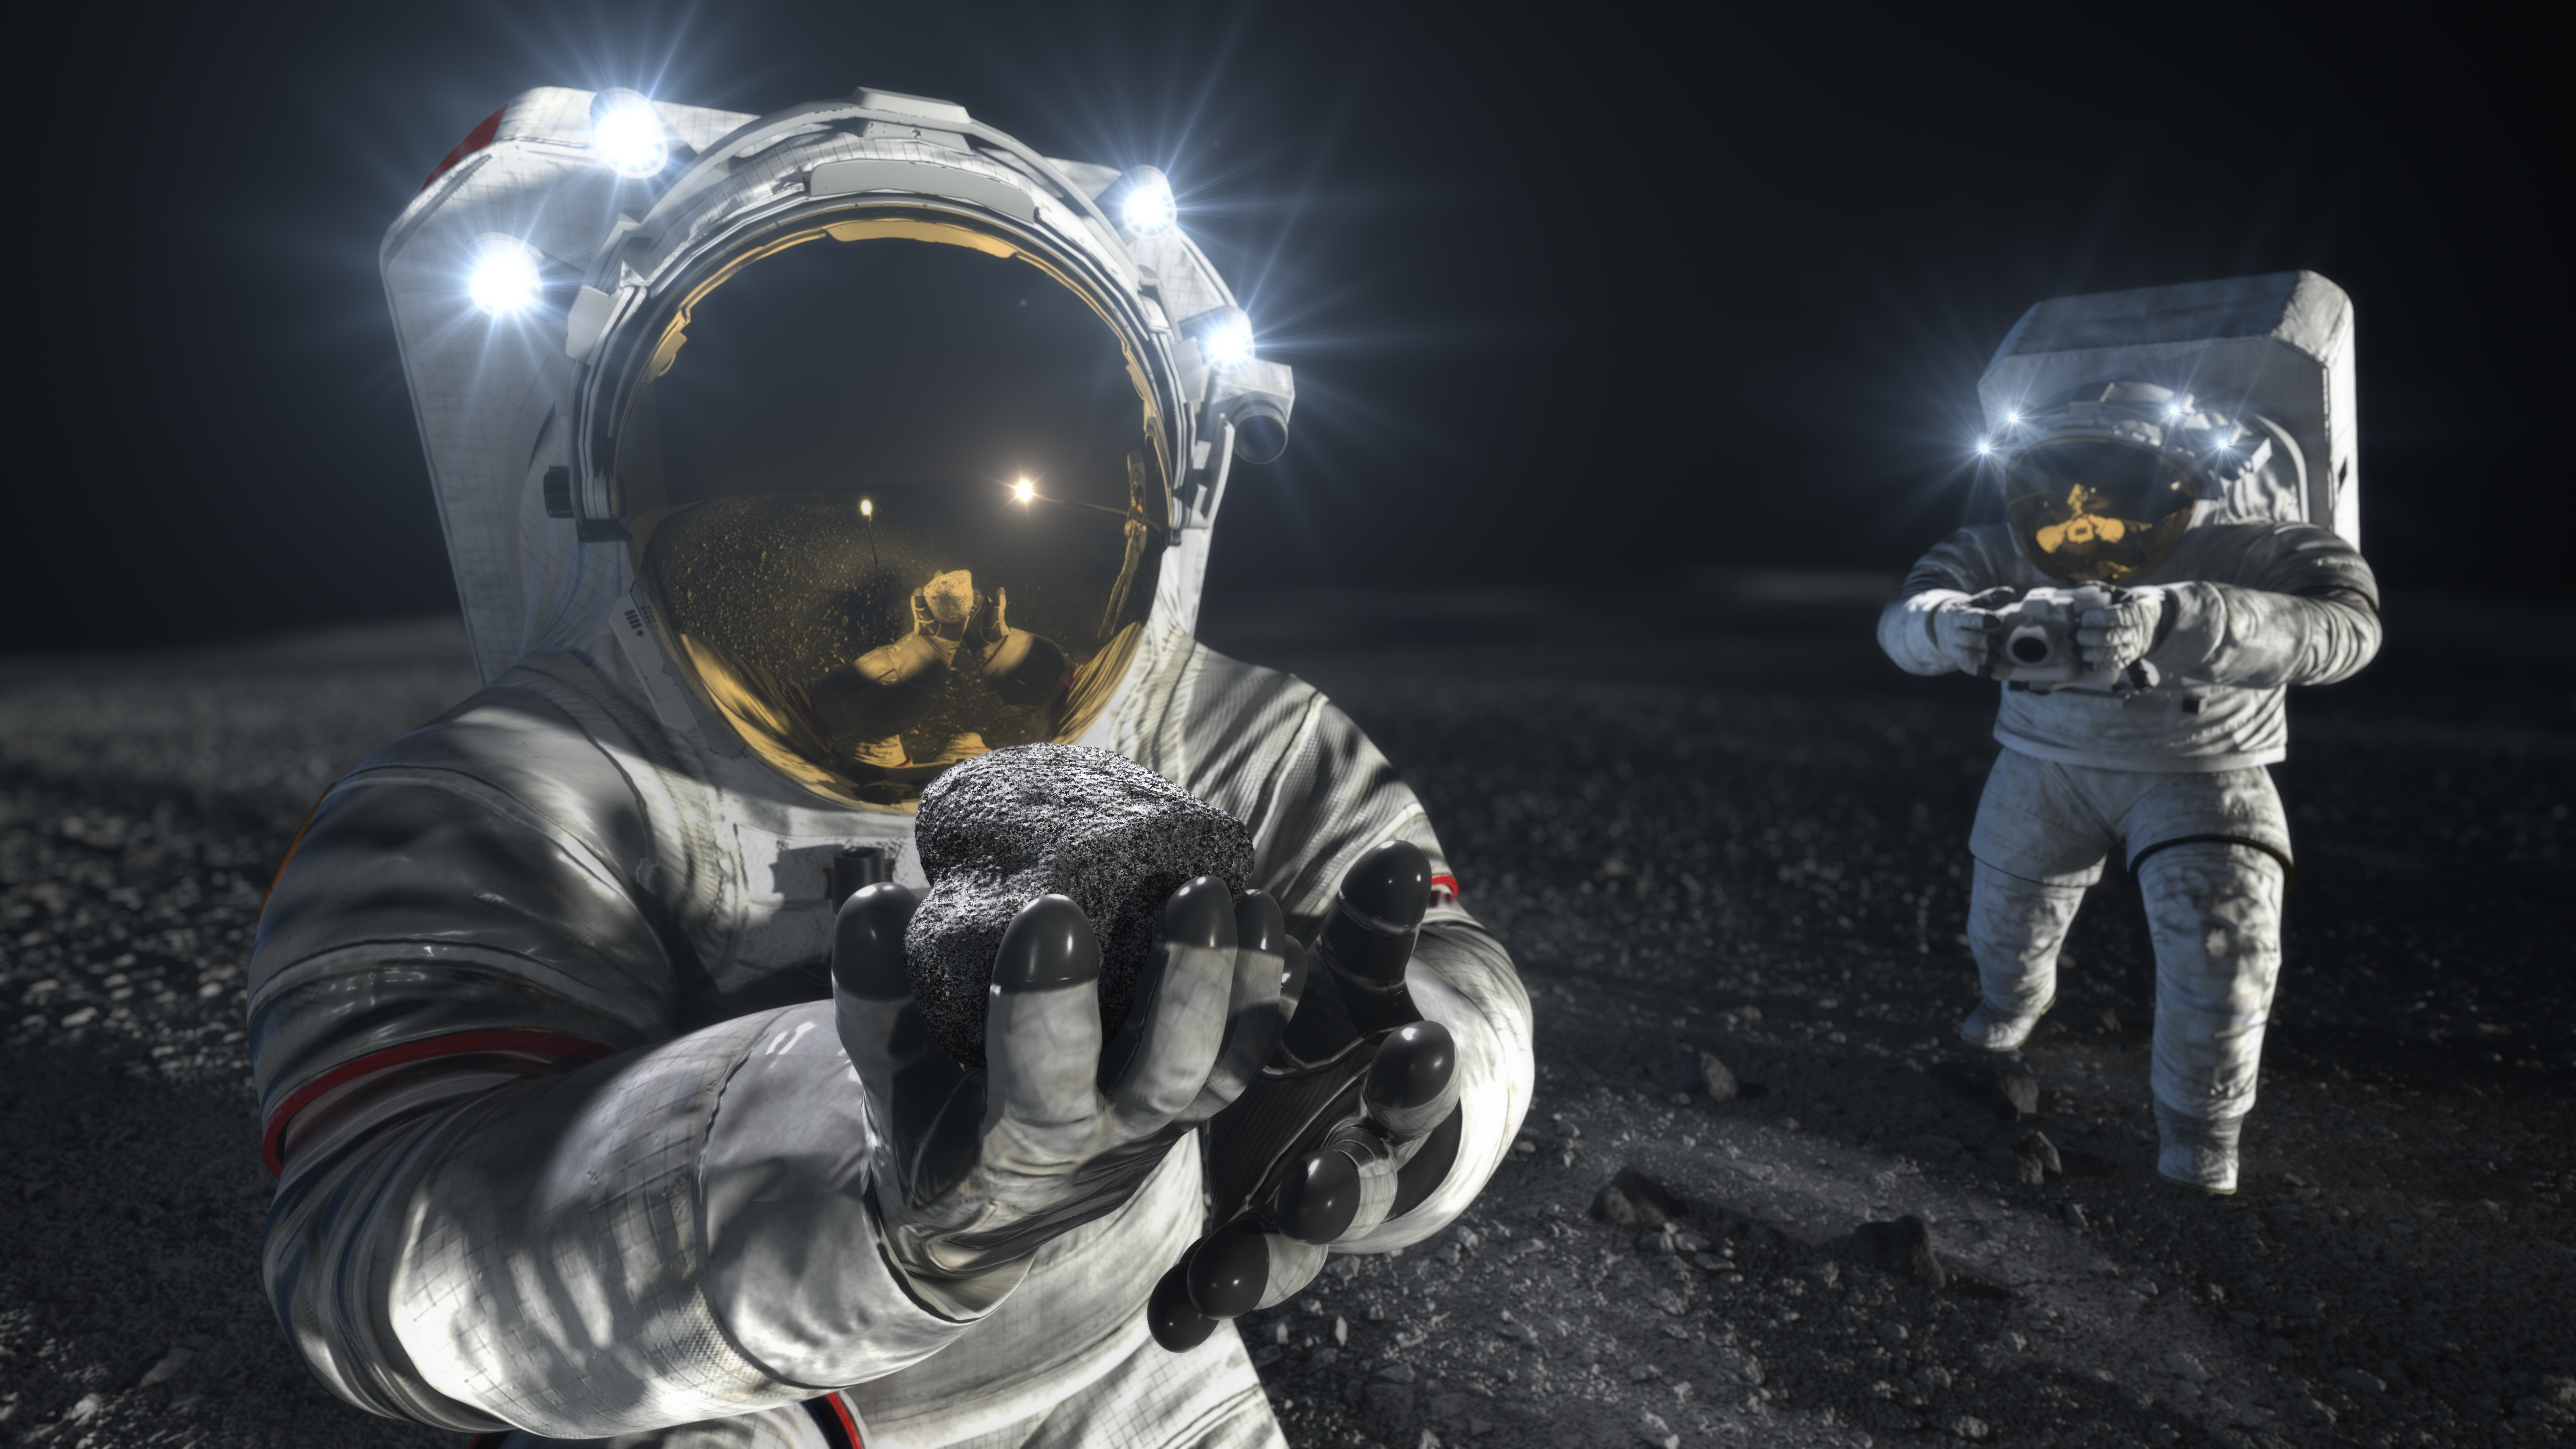 An artists conception of Nasa astronauts using new spacesuits on the Moon